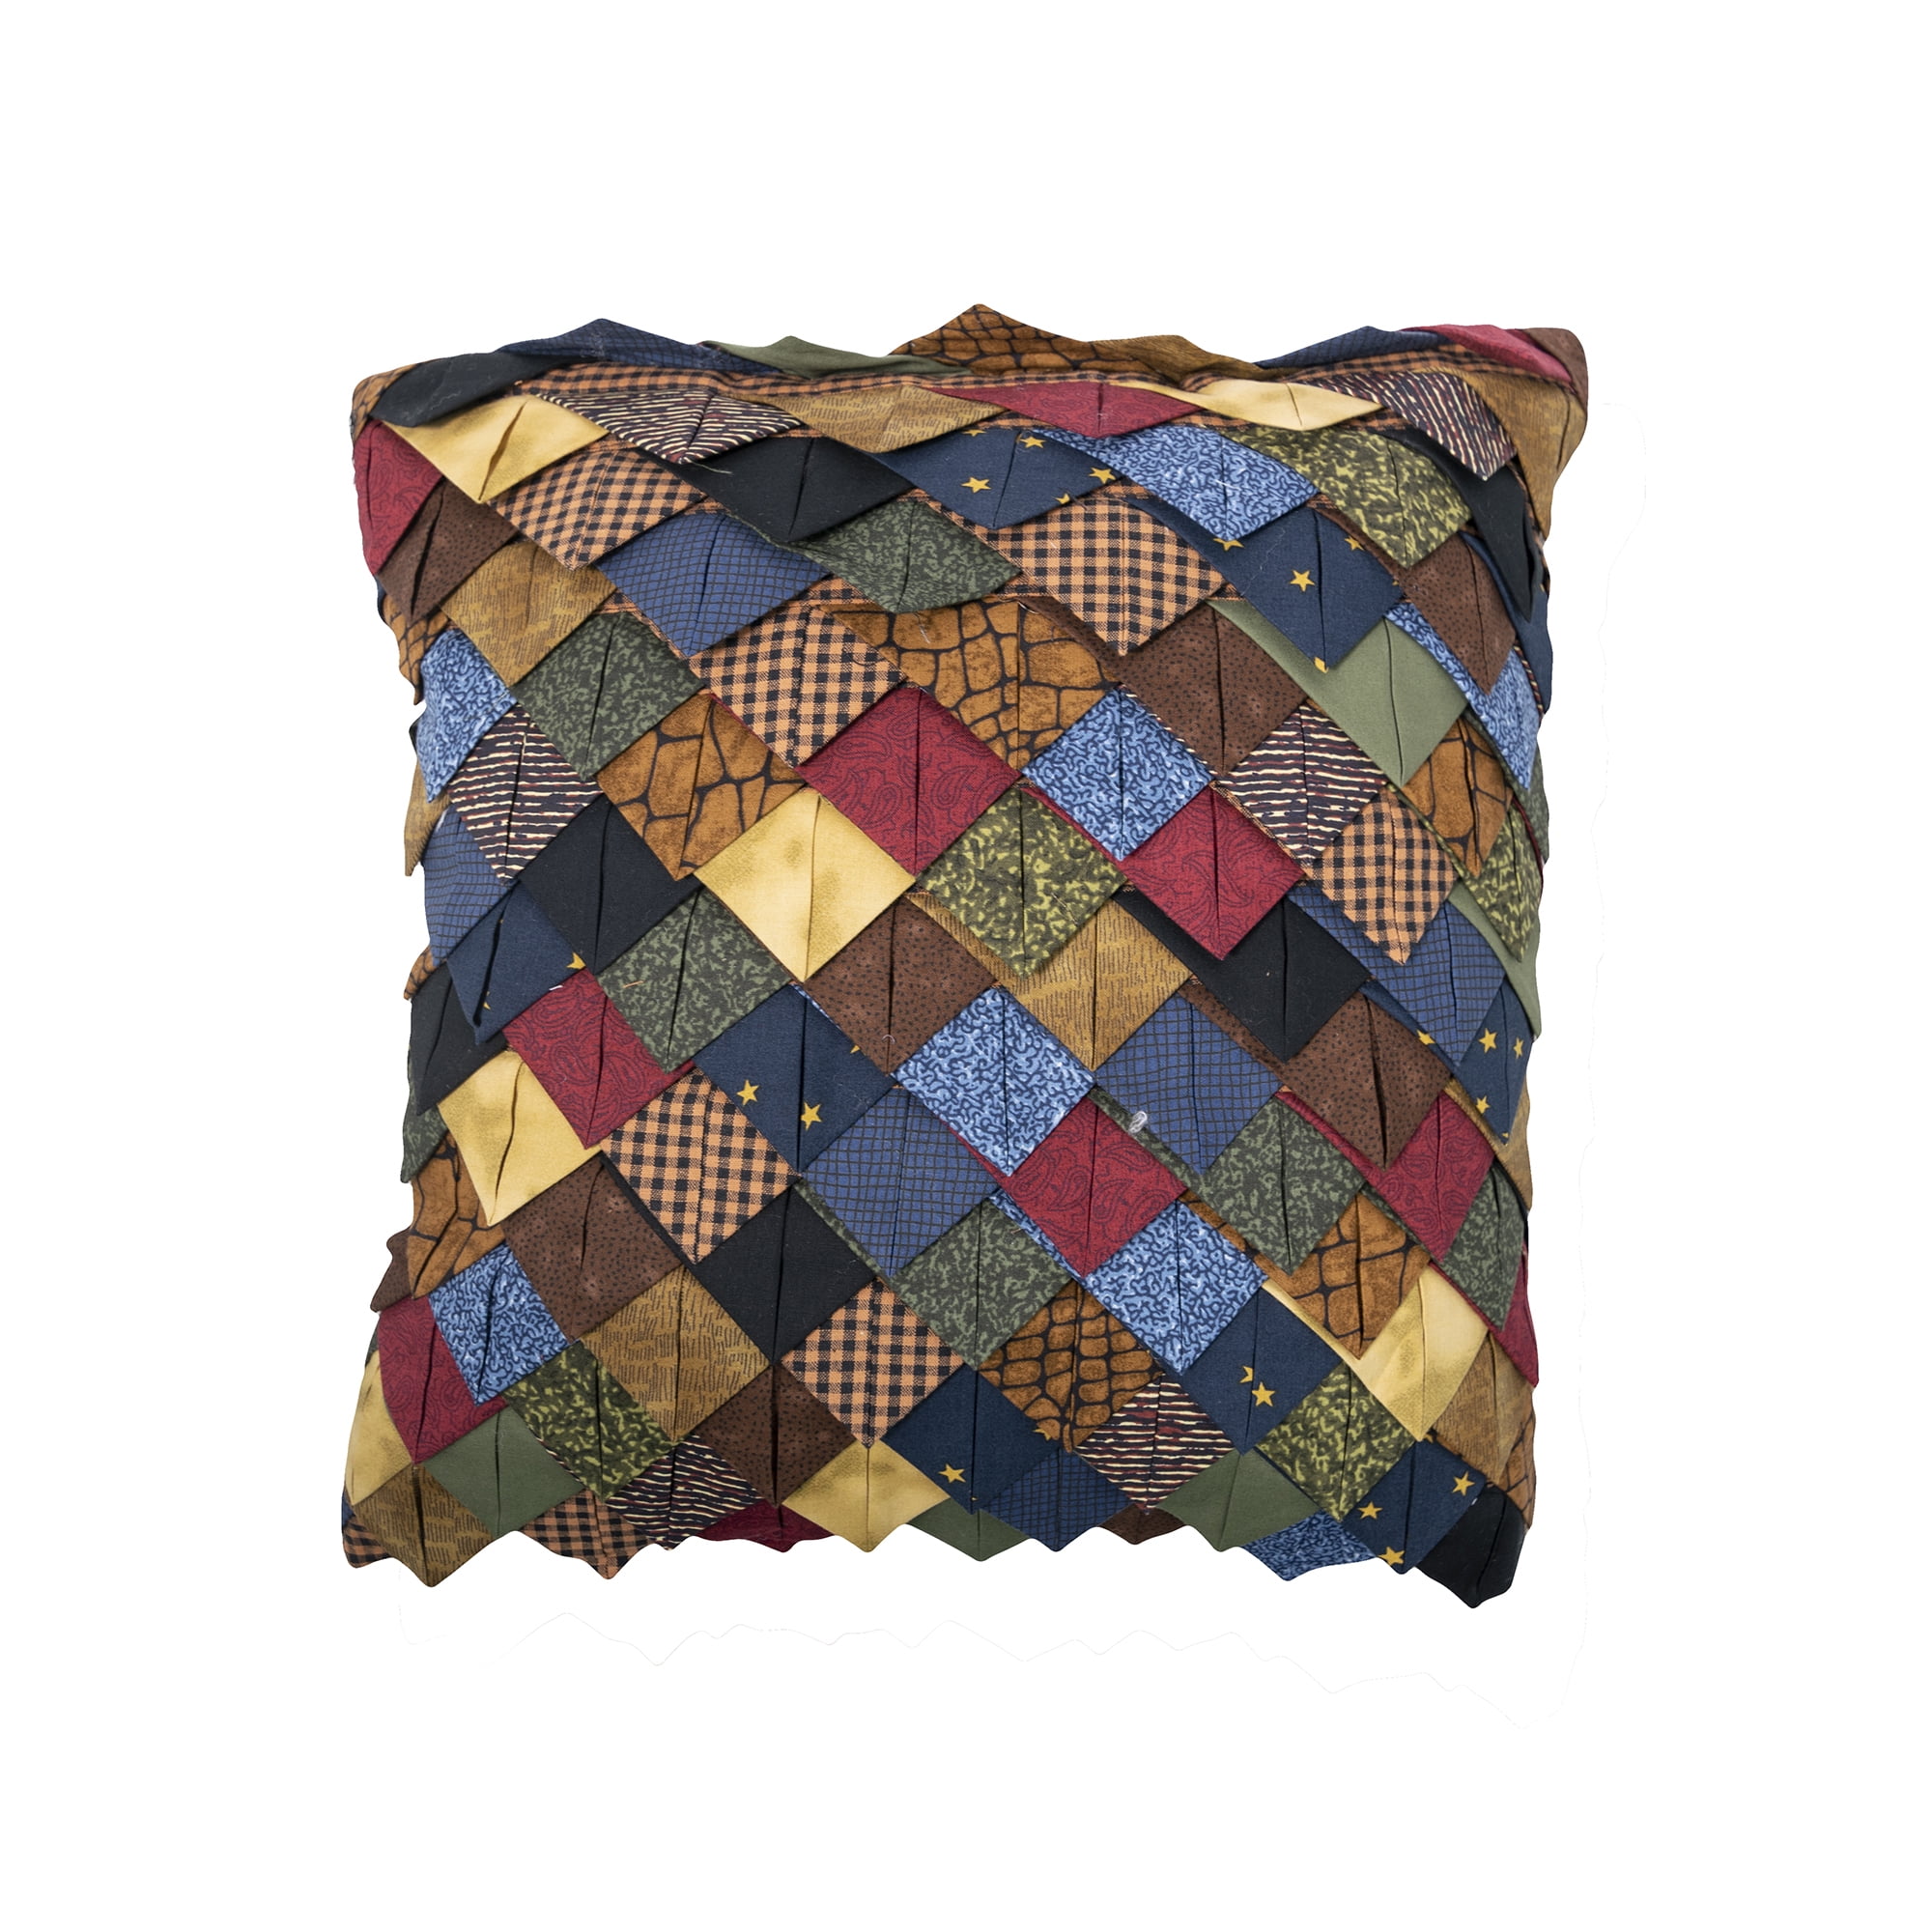 90916 16 X 16 In. Midnight Bear Rooftile Decorative Pillow, Multi Color